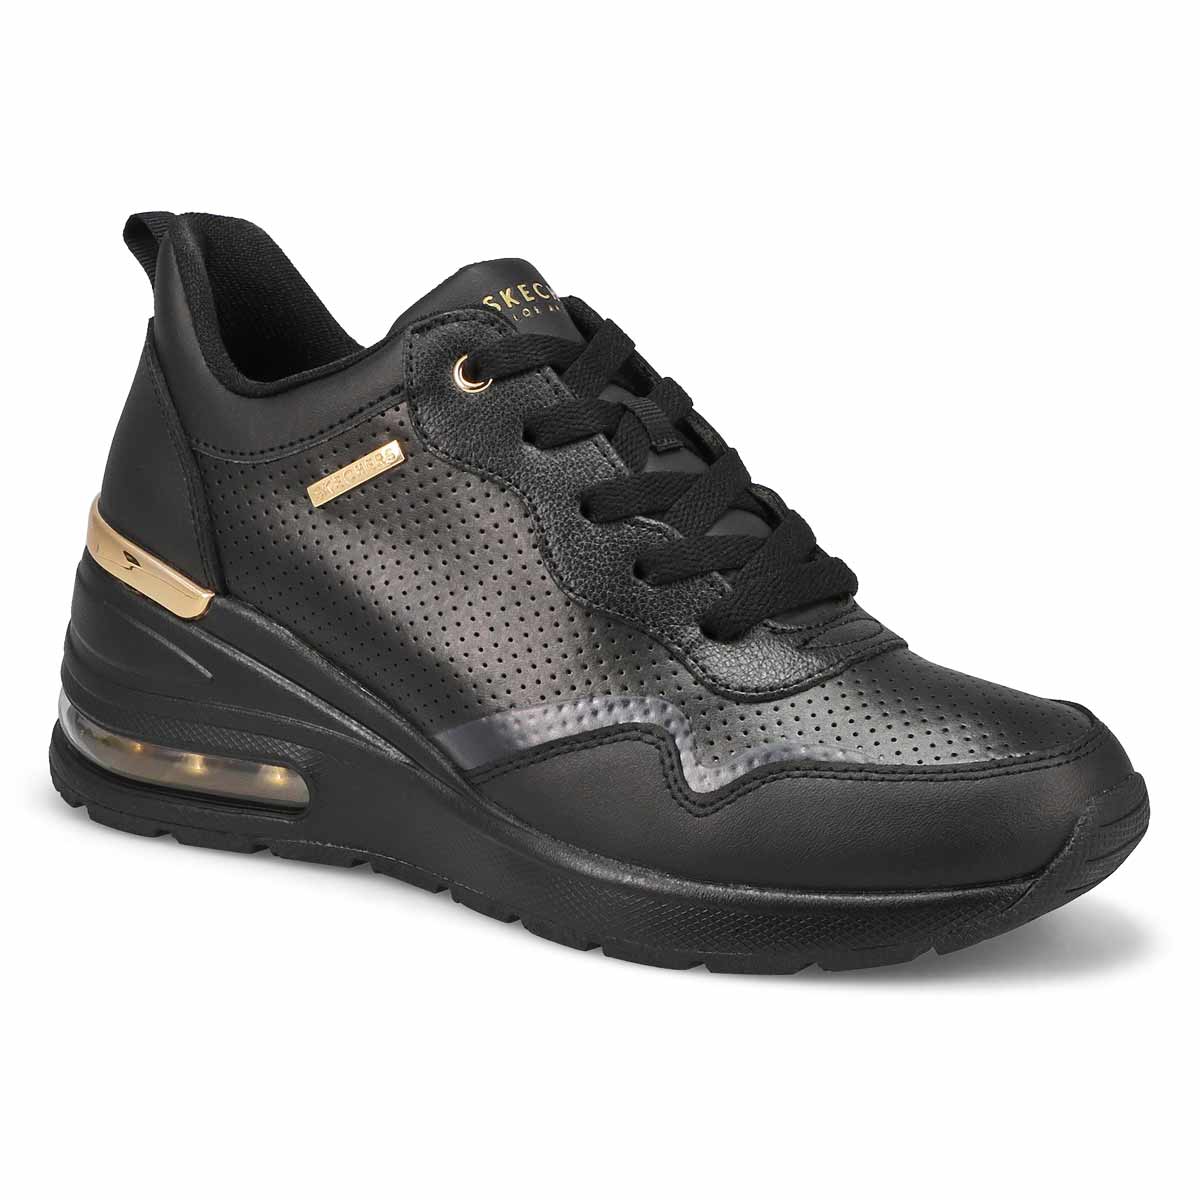 Womens Million Air Lace Up Sneaker - Black